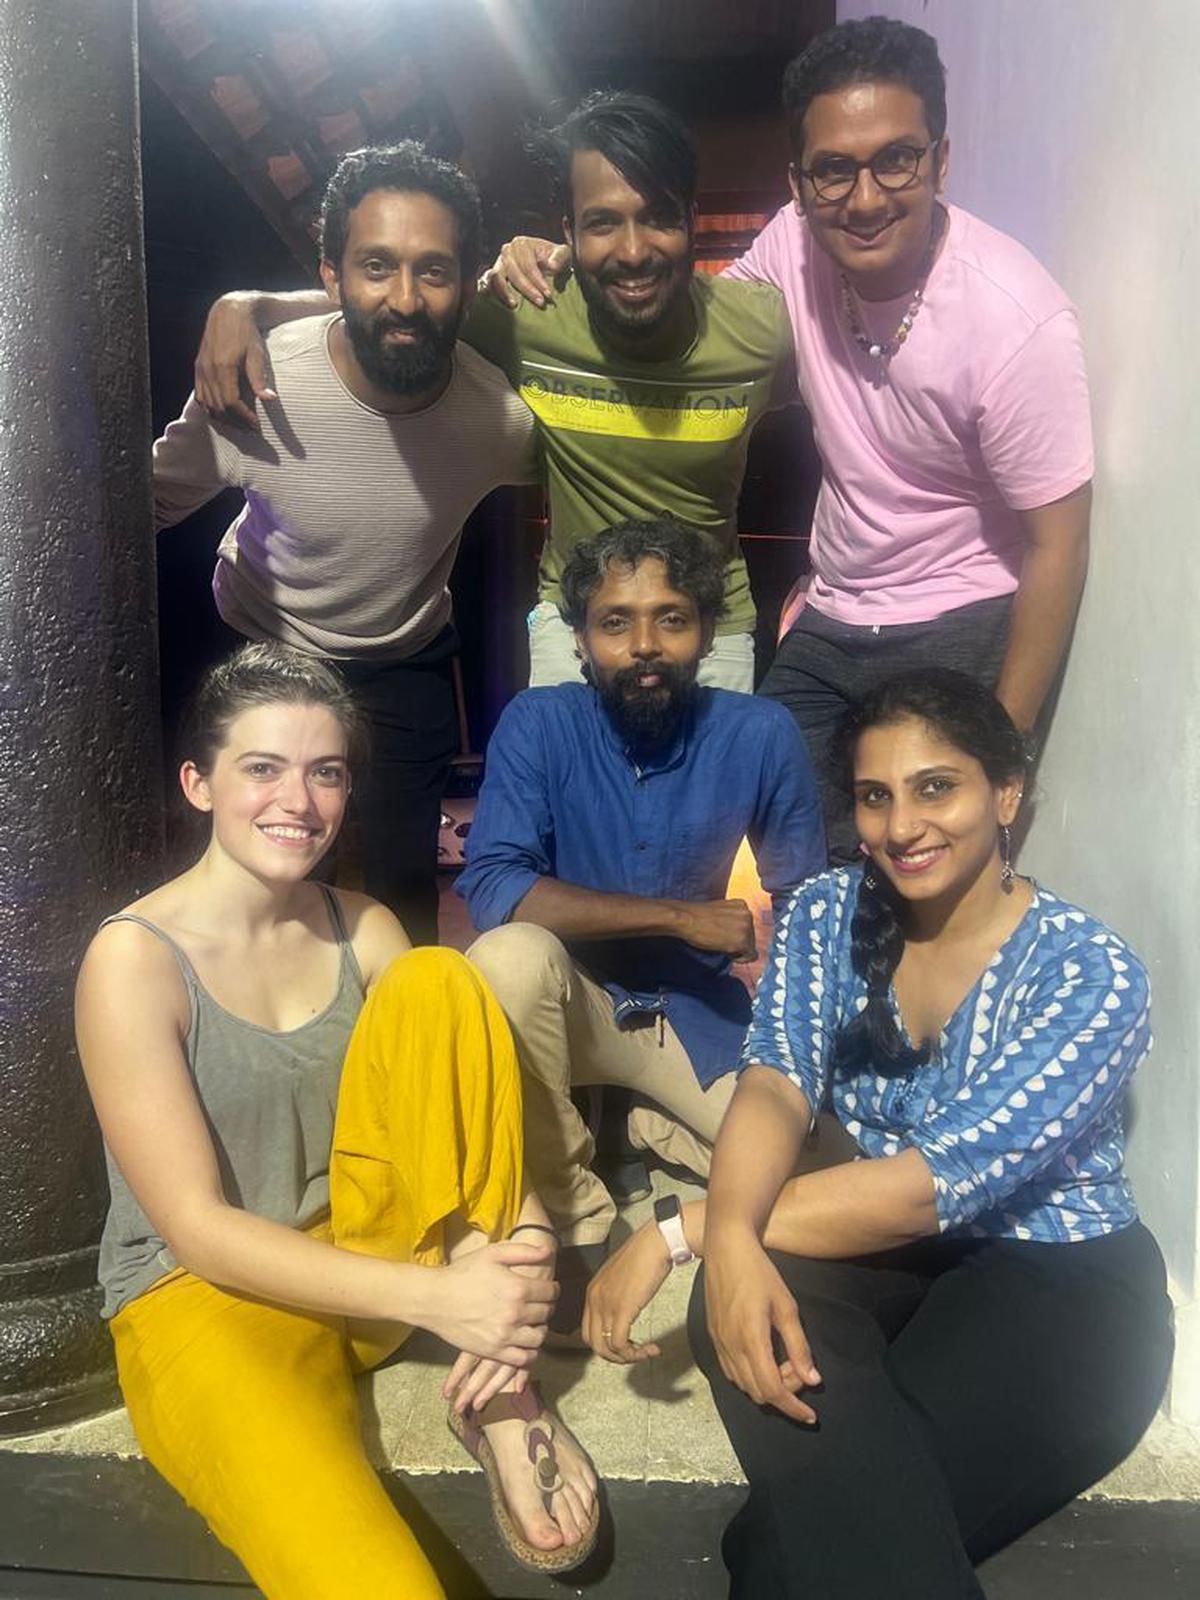 (From left) Anup Mohandas, Arvind TM, Prajith K Prasad, Devaki Rajendran, Subi Sudarsan and Laya Kampama, the independent artists behind the crowd-funded dance and theater festival in Thiruvananthapuram.